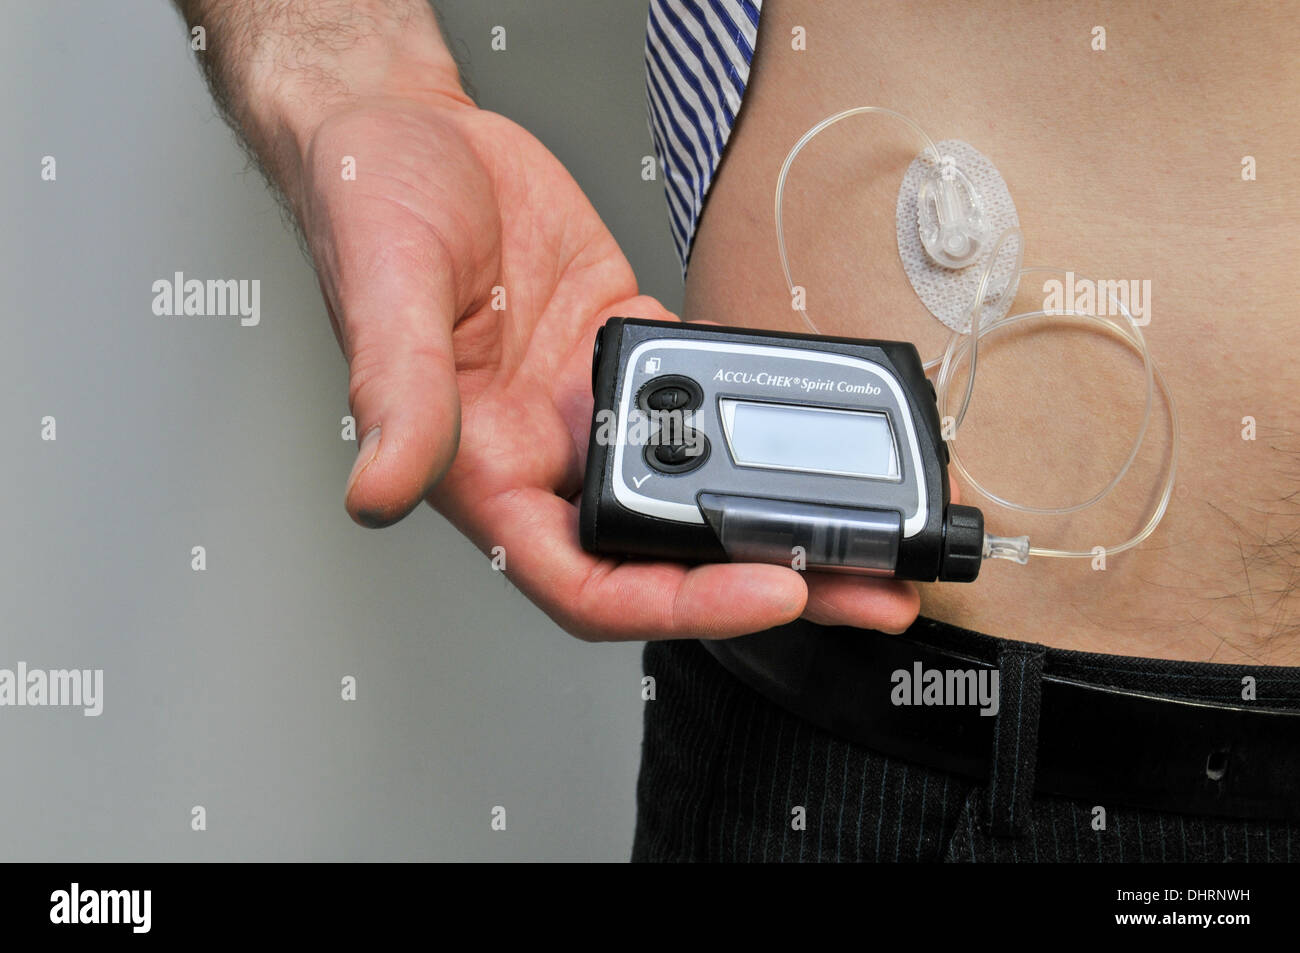 An Accu-Chek Spirit Combo for pumping Insulin into a Diabetic patient Stock  Photo - Alamy